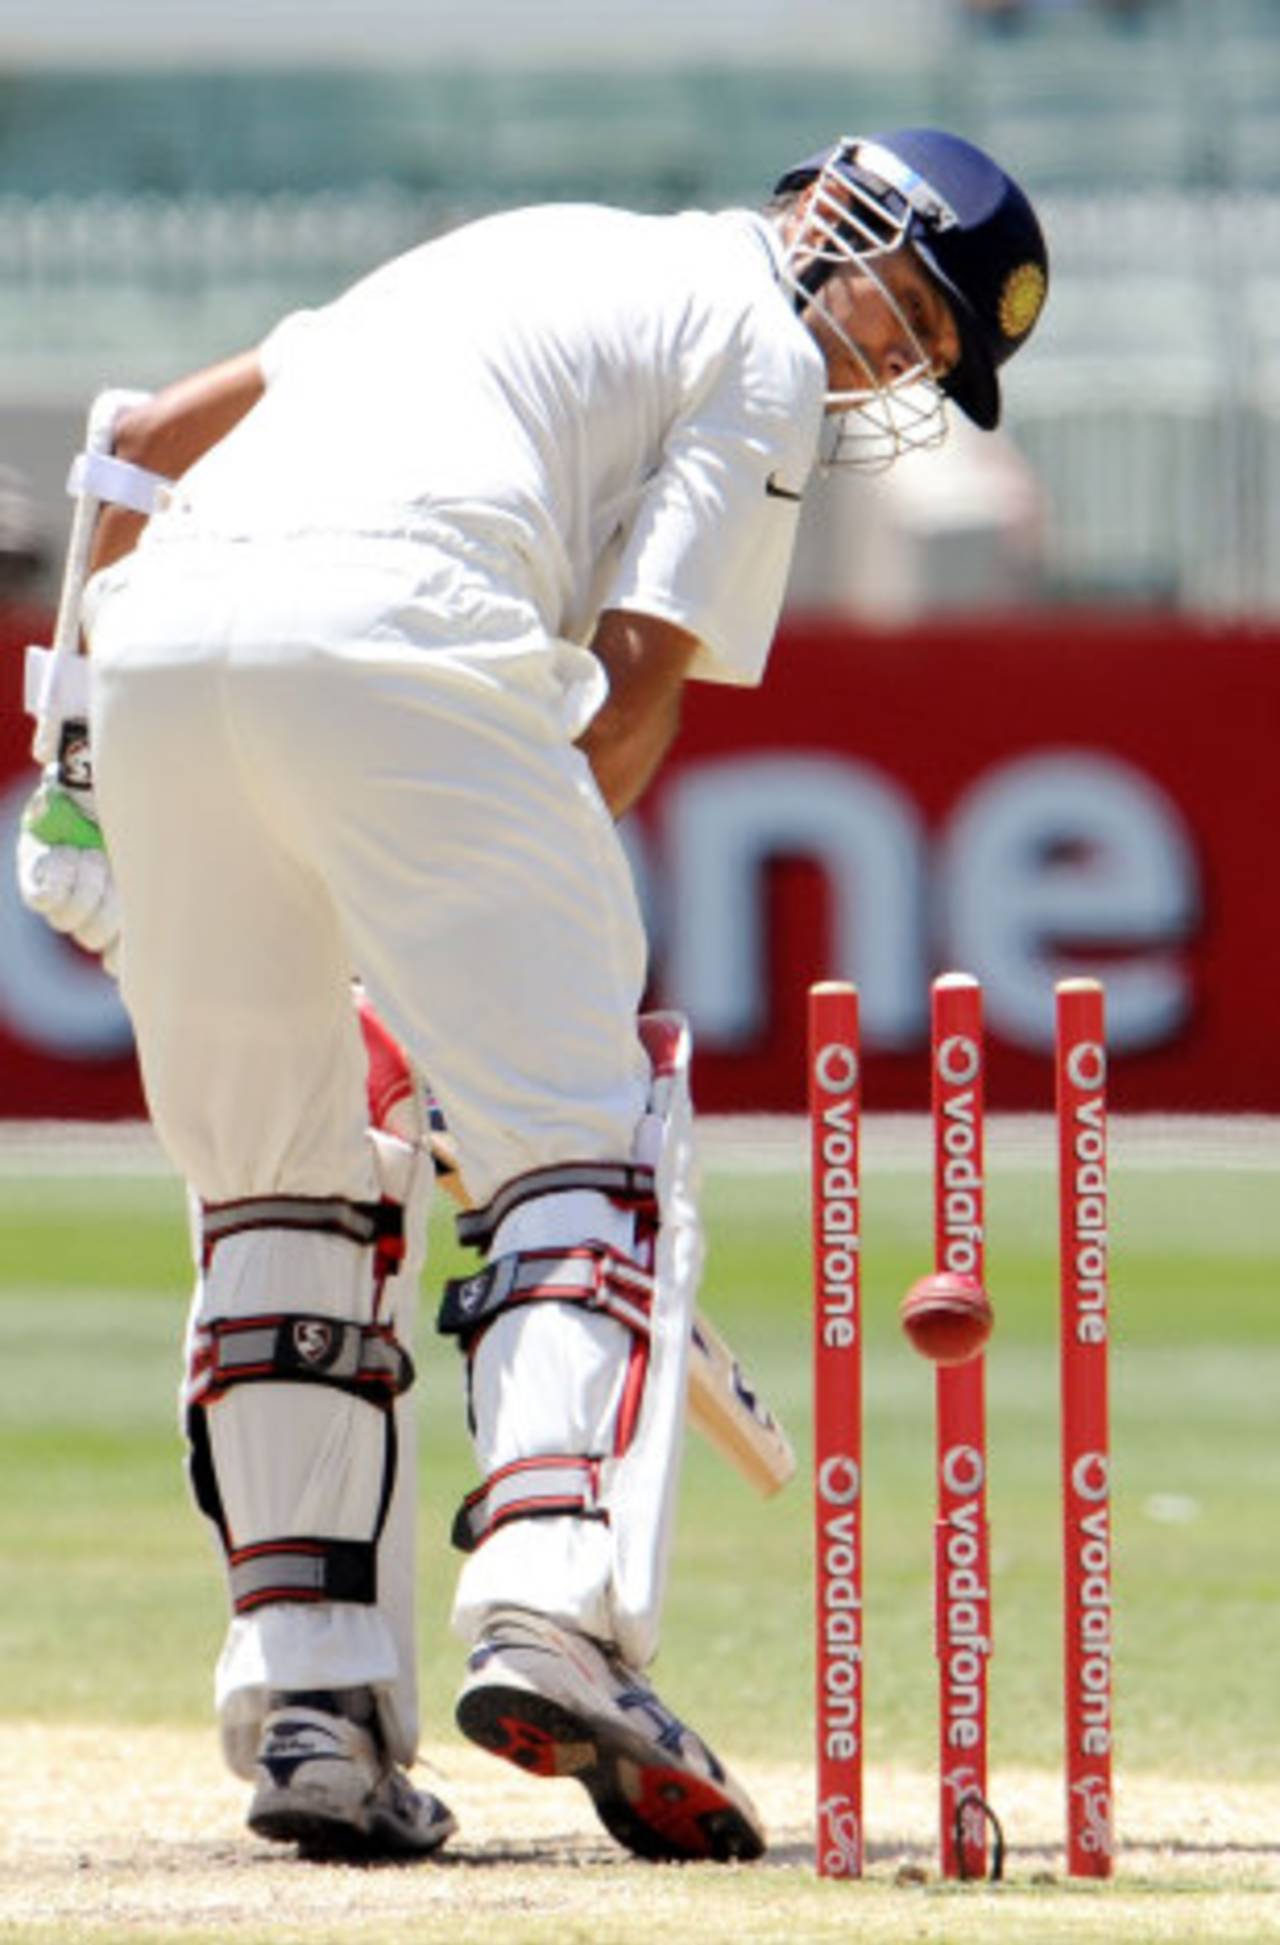 Rahul Dravid is bowled by James Pattinson, Australia v India, 1st Test, Melbourne, 4th day, December 29, 2011